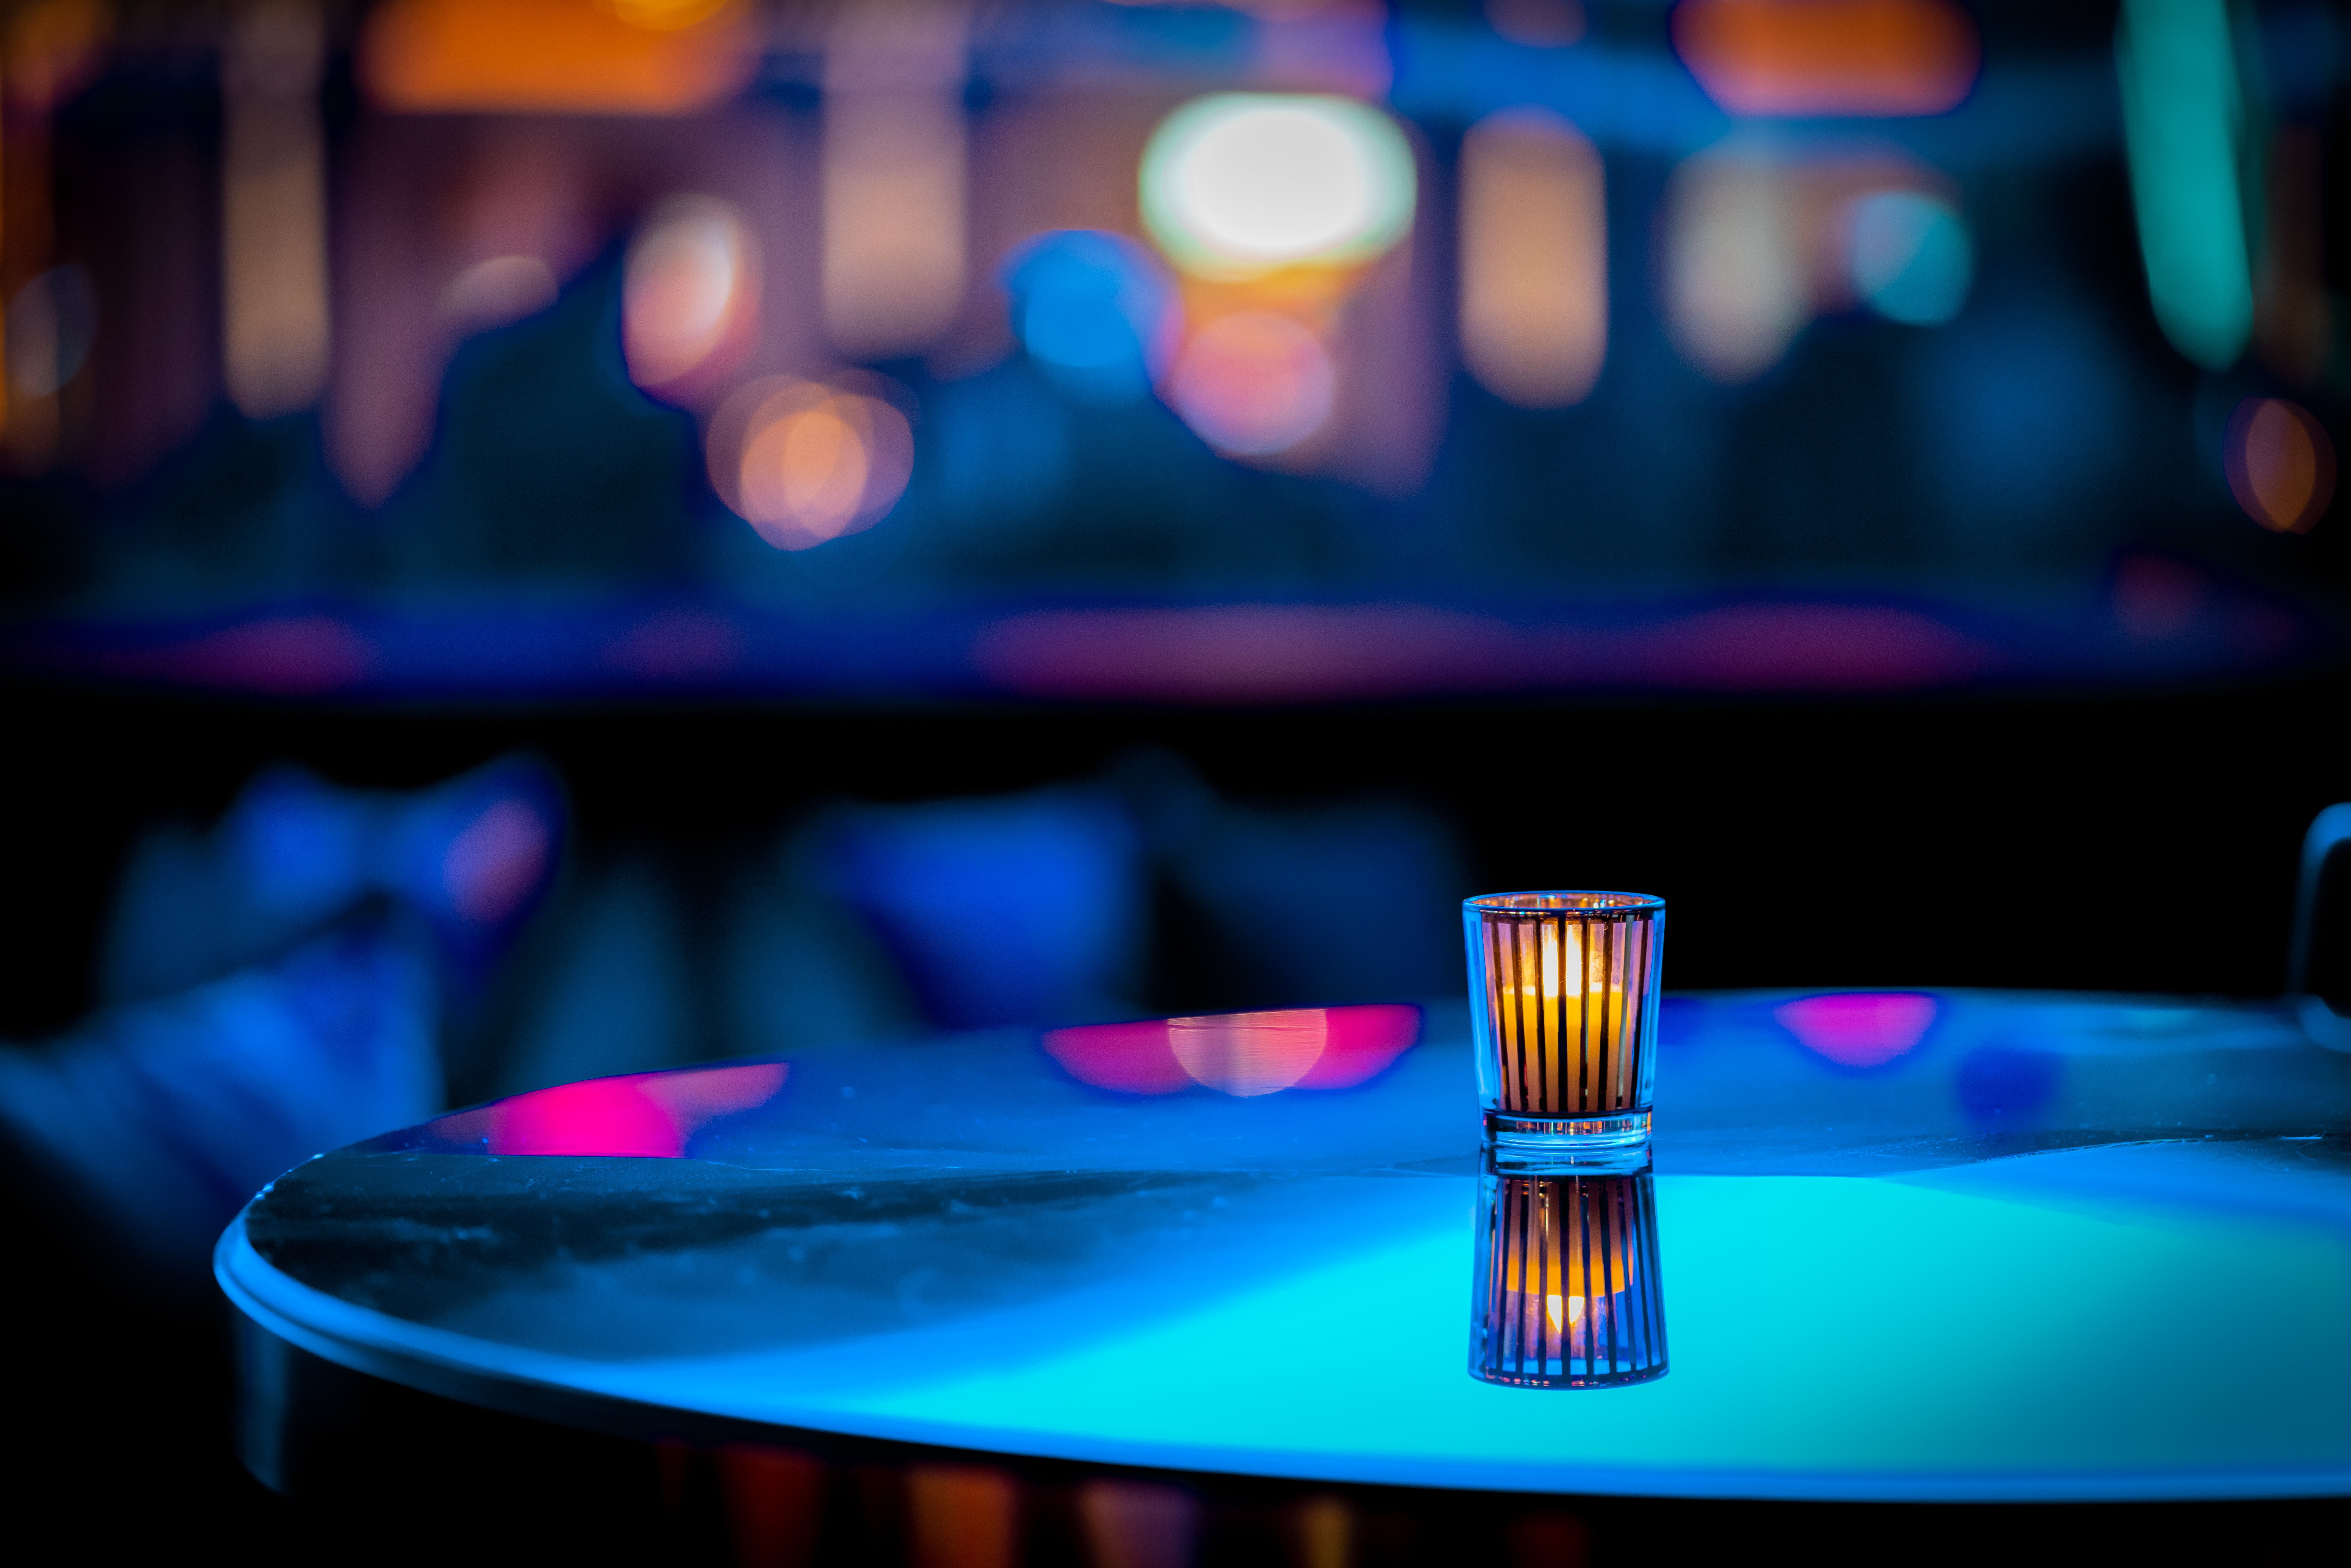 A photo of a minimalistic candle on table at a nightclub with an out of focus background | Source: Getty Images